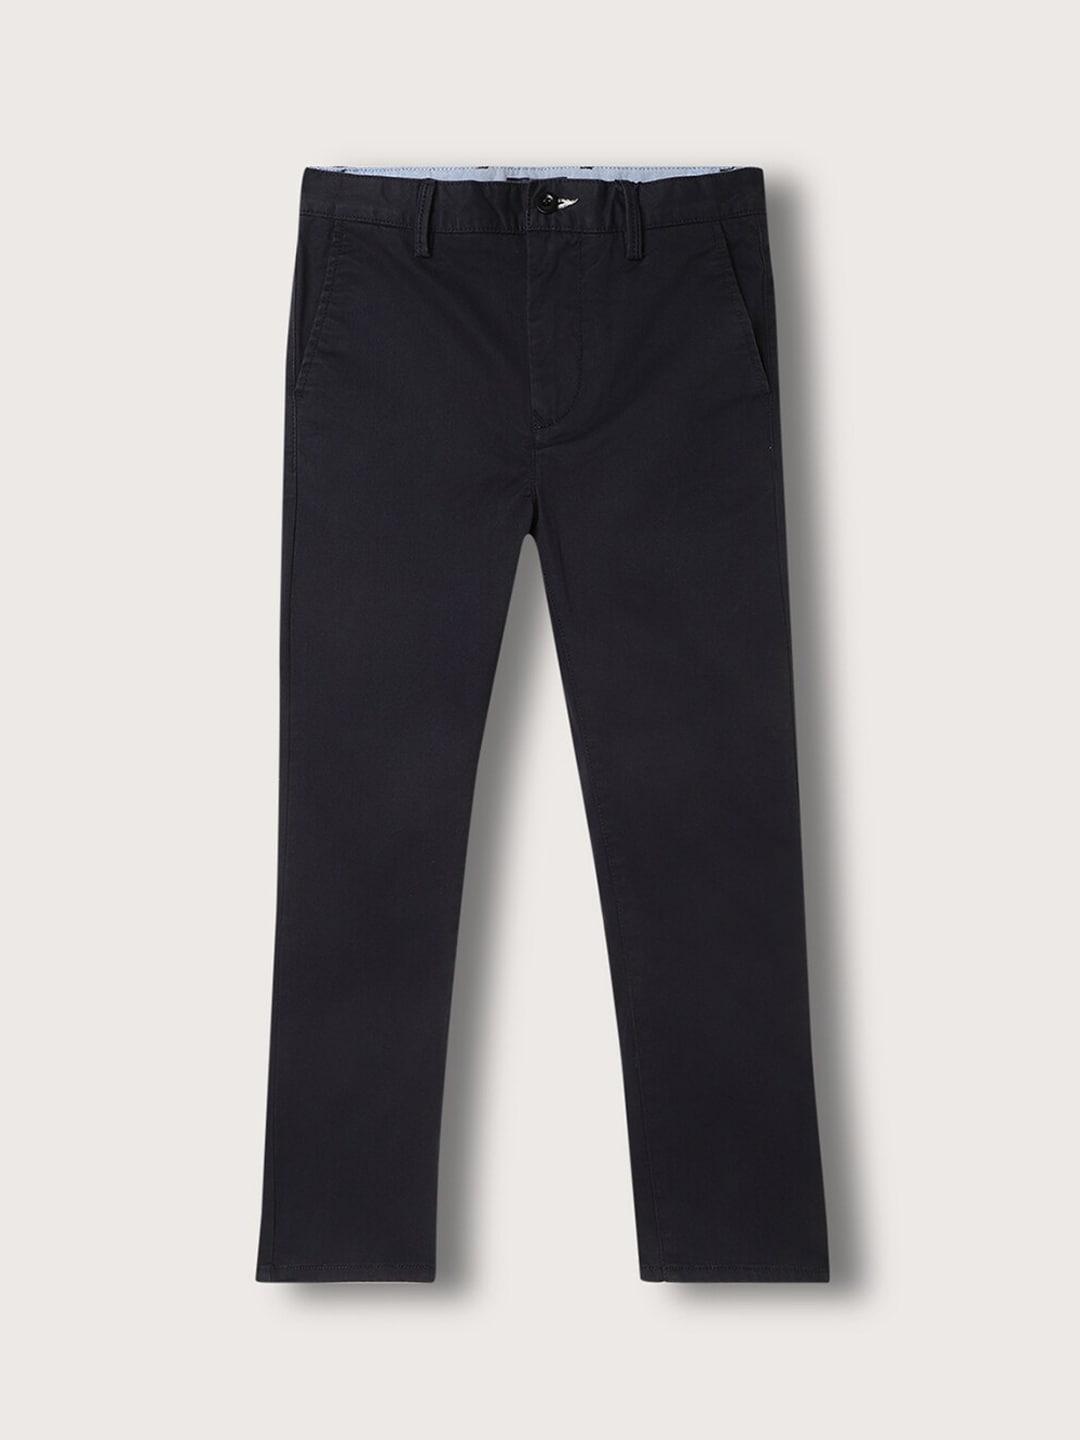 GANT Boys Mid Rise Cotton Chinos Trousers